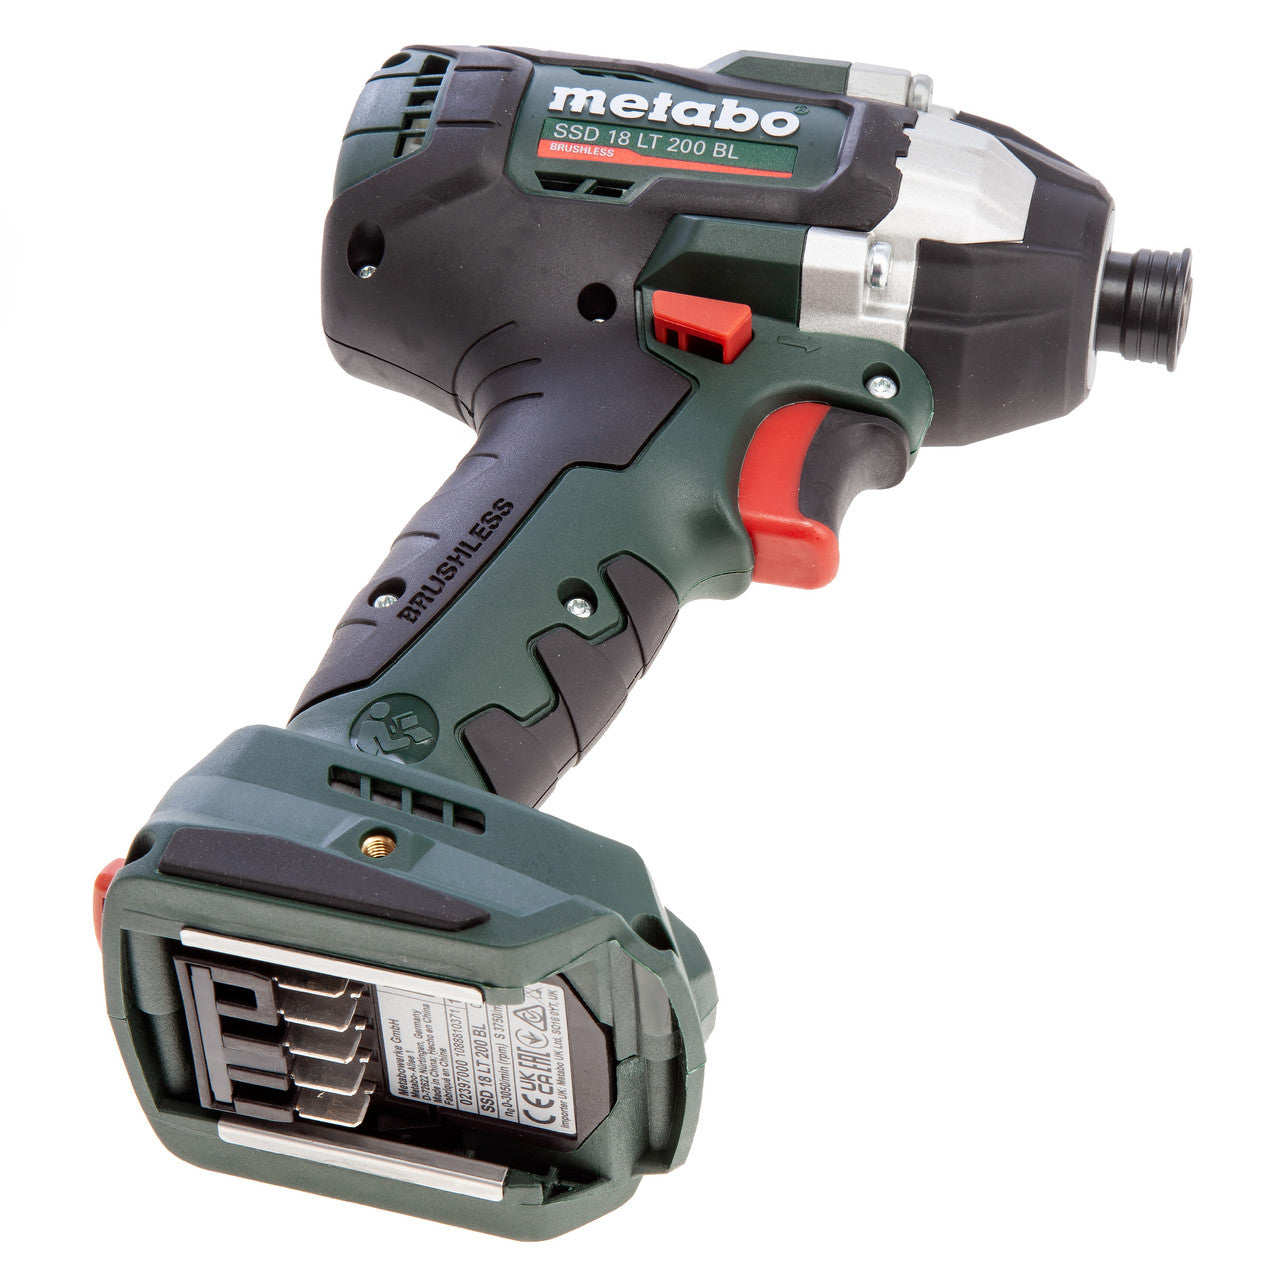 Metabo 602397840 SSD 18 LT 200 BL Impact Driver (Body Only) in metaBOX 145